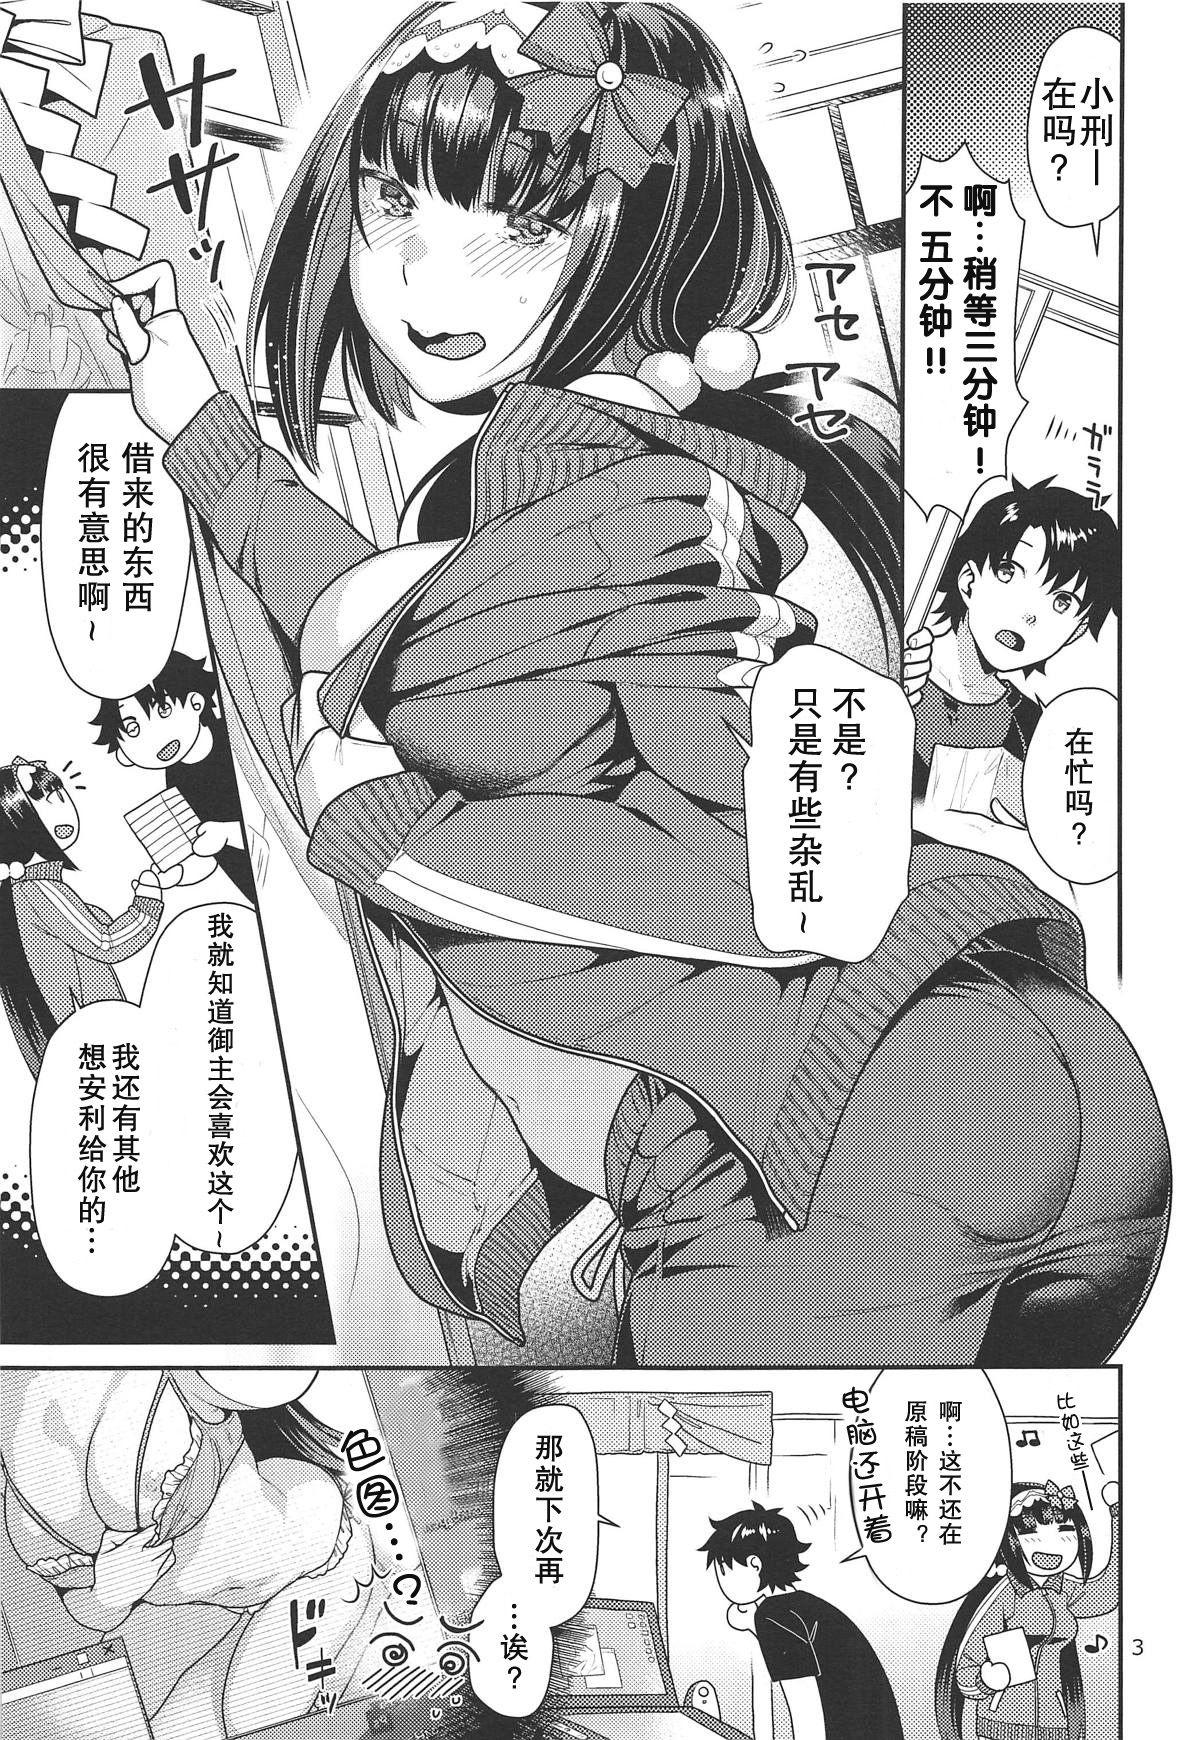 Beard Hime to Jersey to Ero Shitagi - Fate grand order Dominant - Page 3